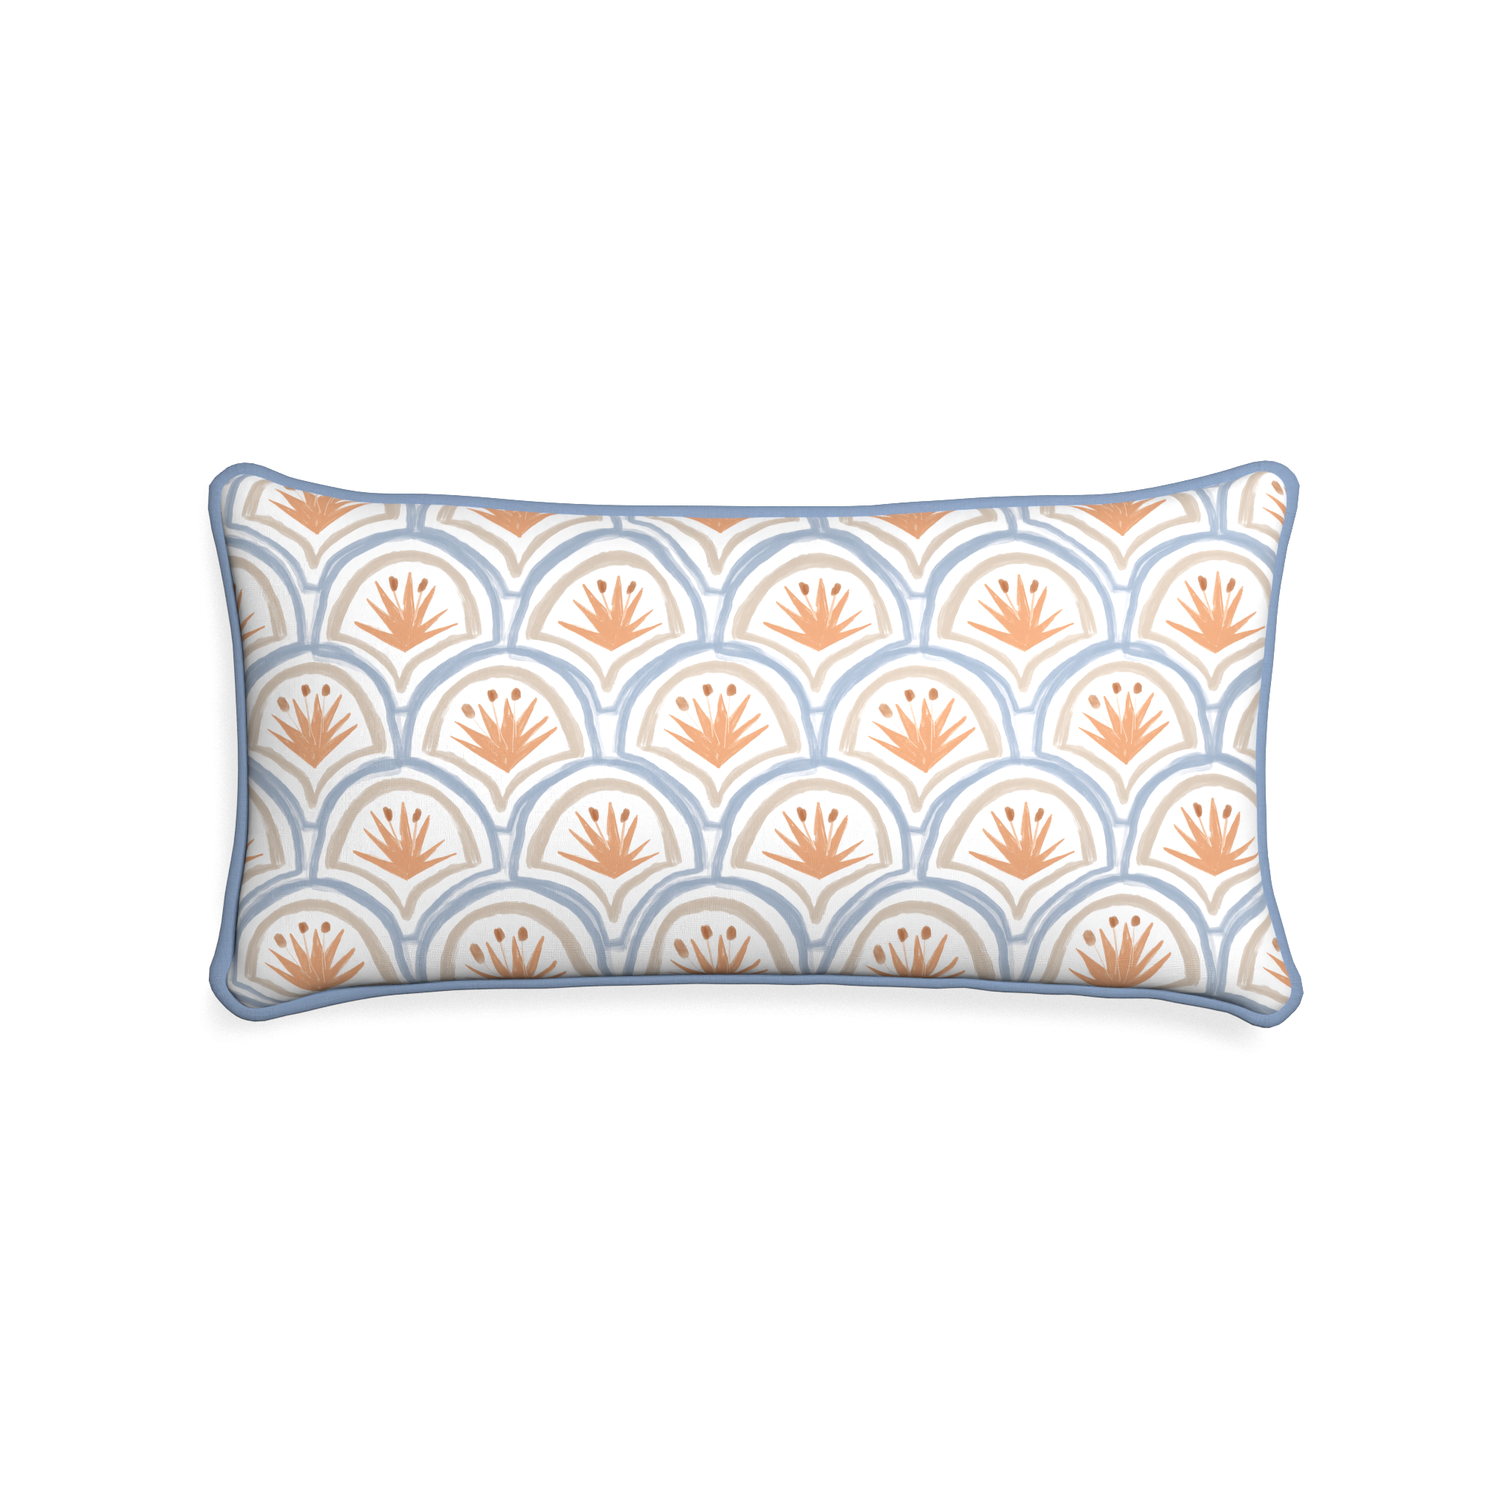 Midi-lumbar thatcher apricot custom art deco palm patternpillow with sky piping on white background